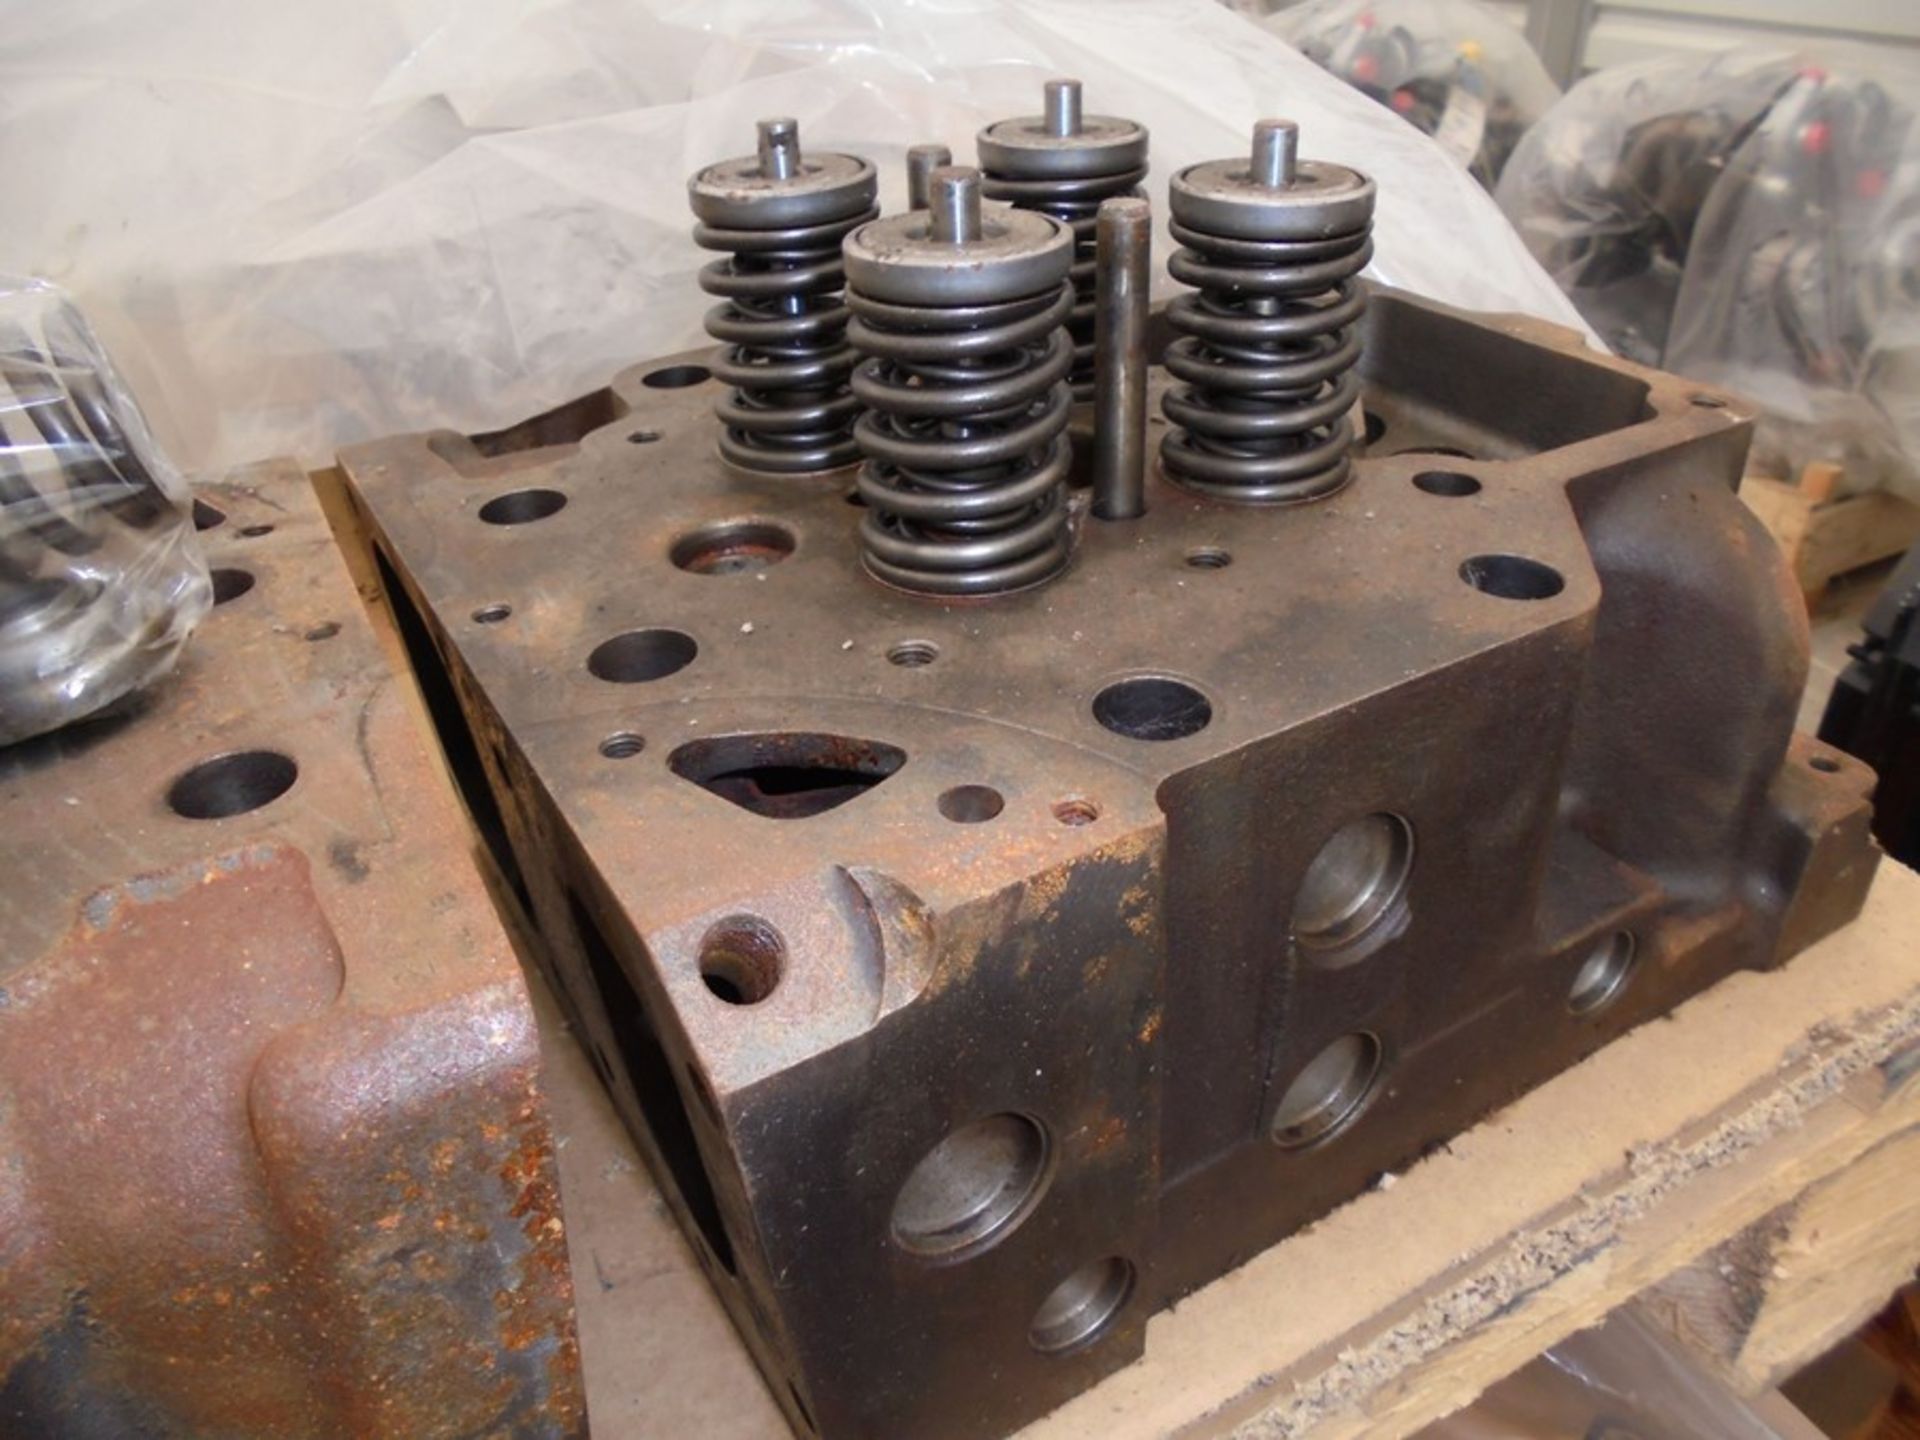 8 x used Caterpillar 3516 cylinder heads, part numbers 205-1560 and 20R3547 (mostly without